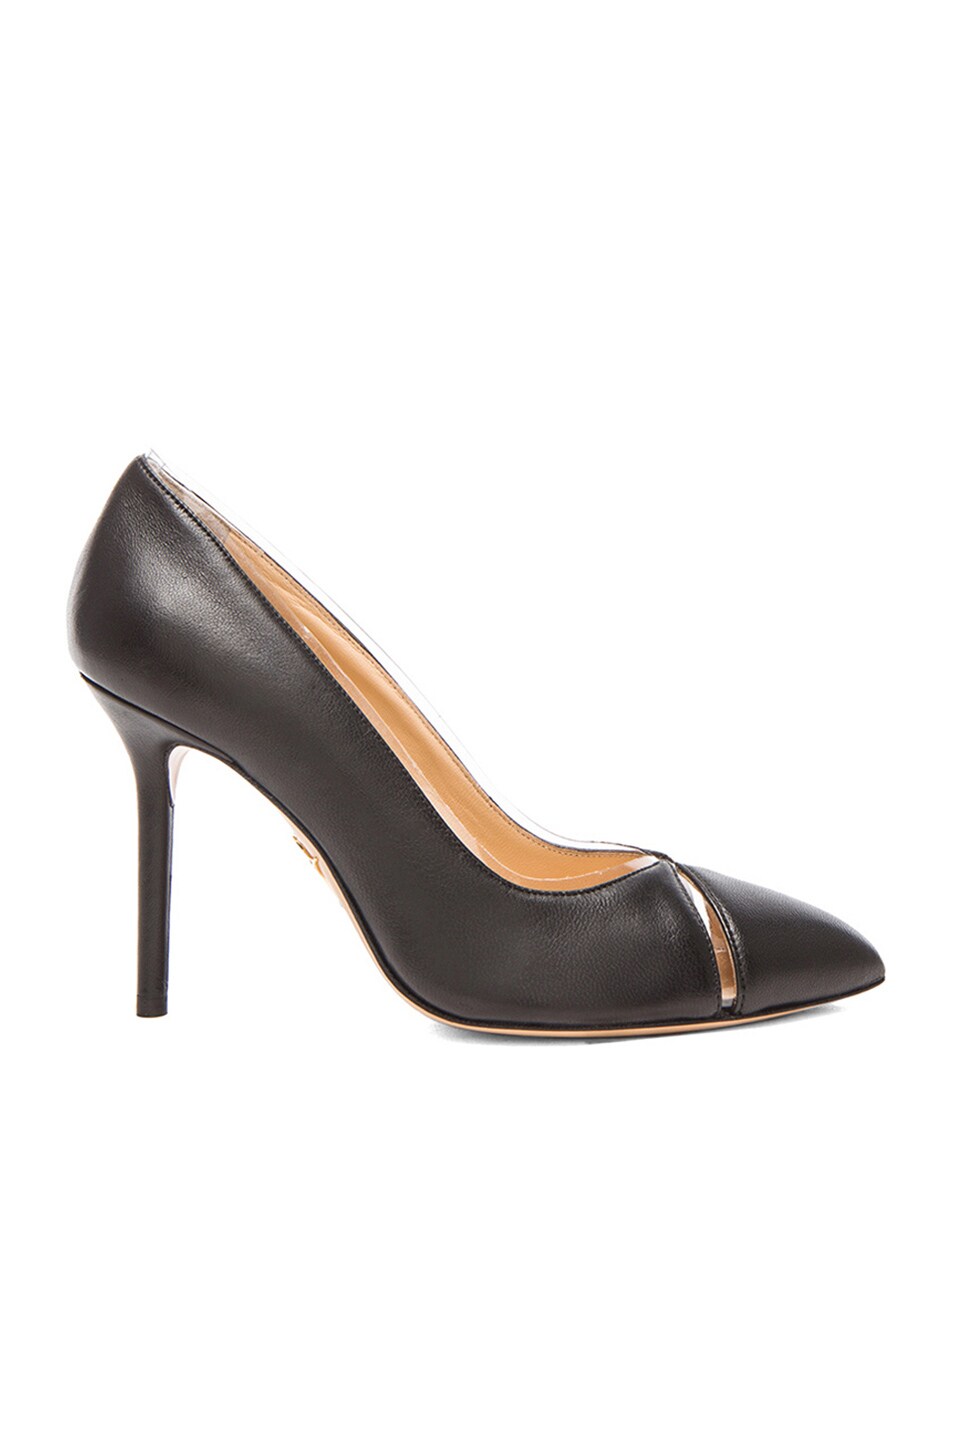 Image 1 of Charlotte Olympia Natalie Nappa Leather Pumps in Black